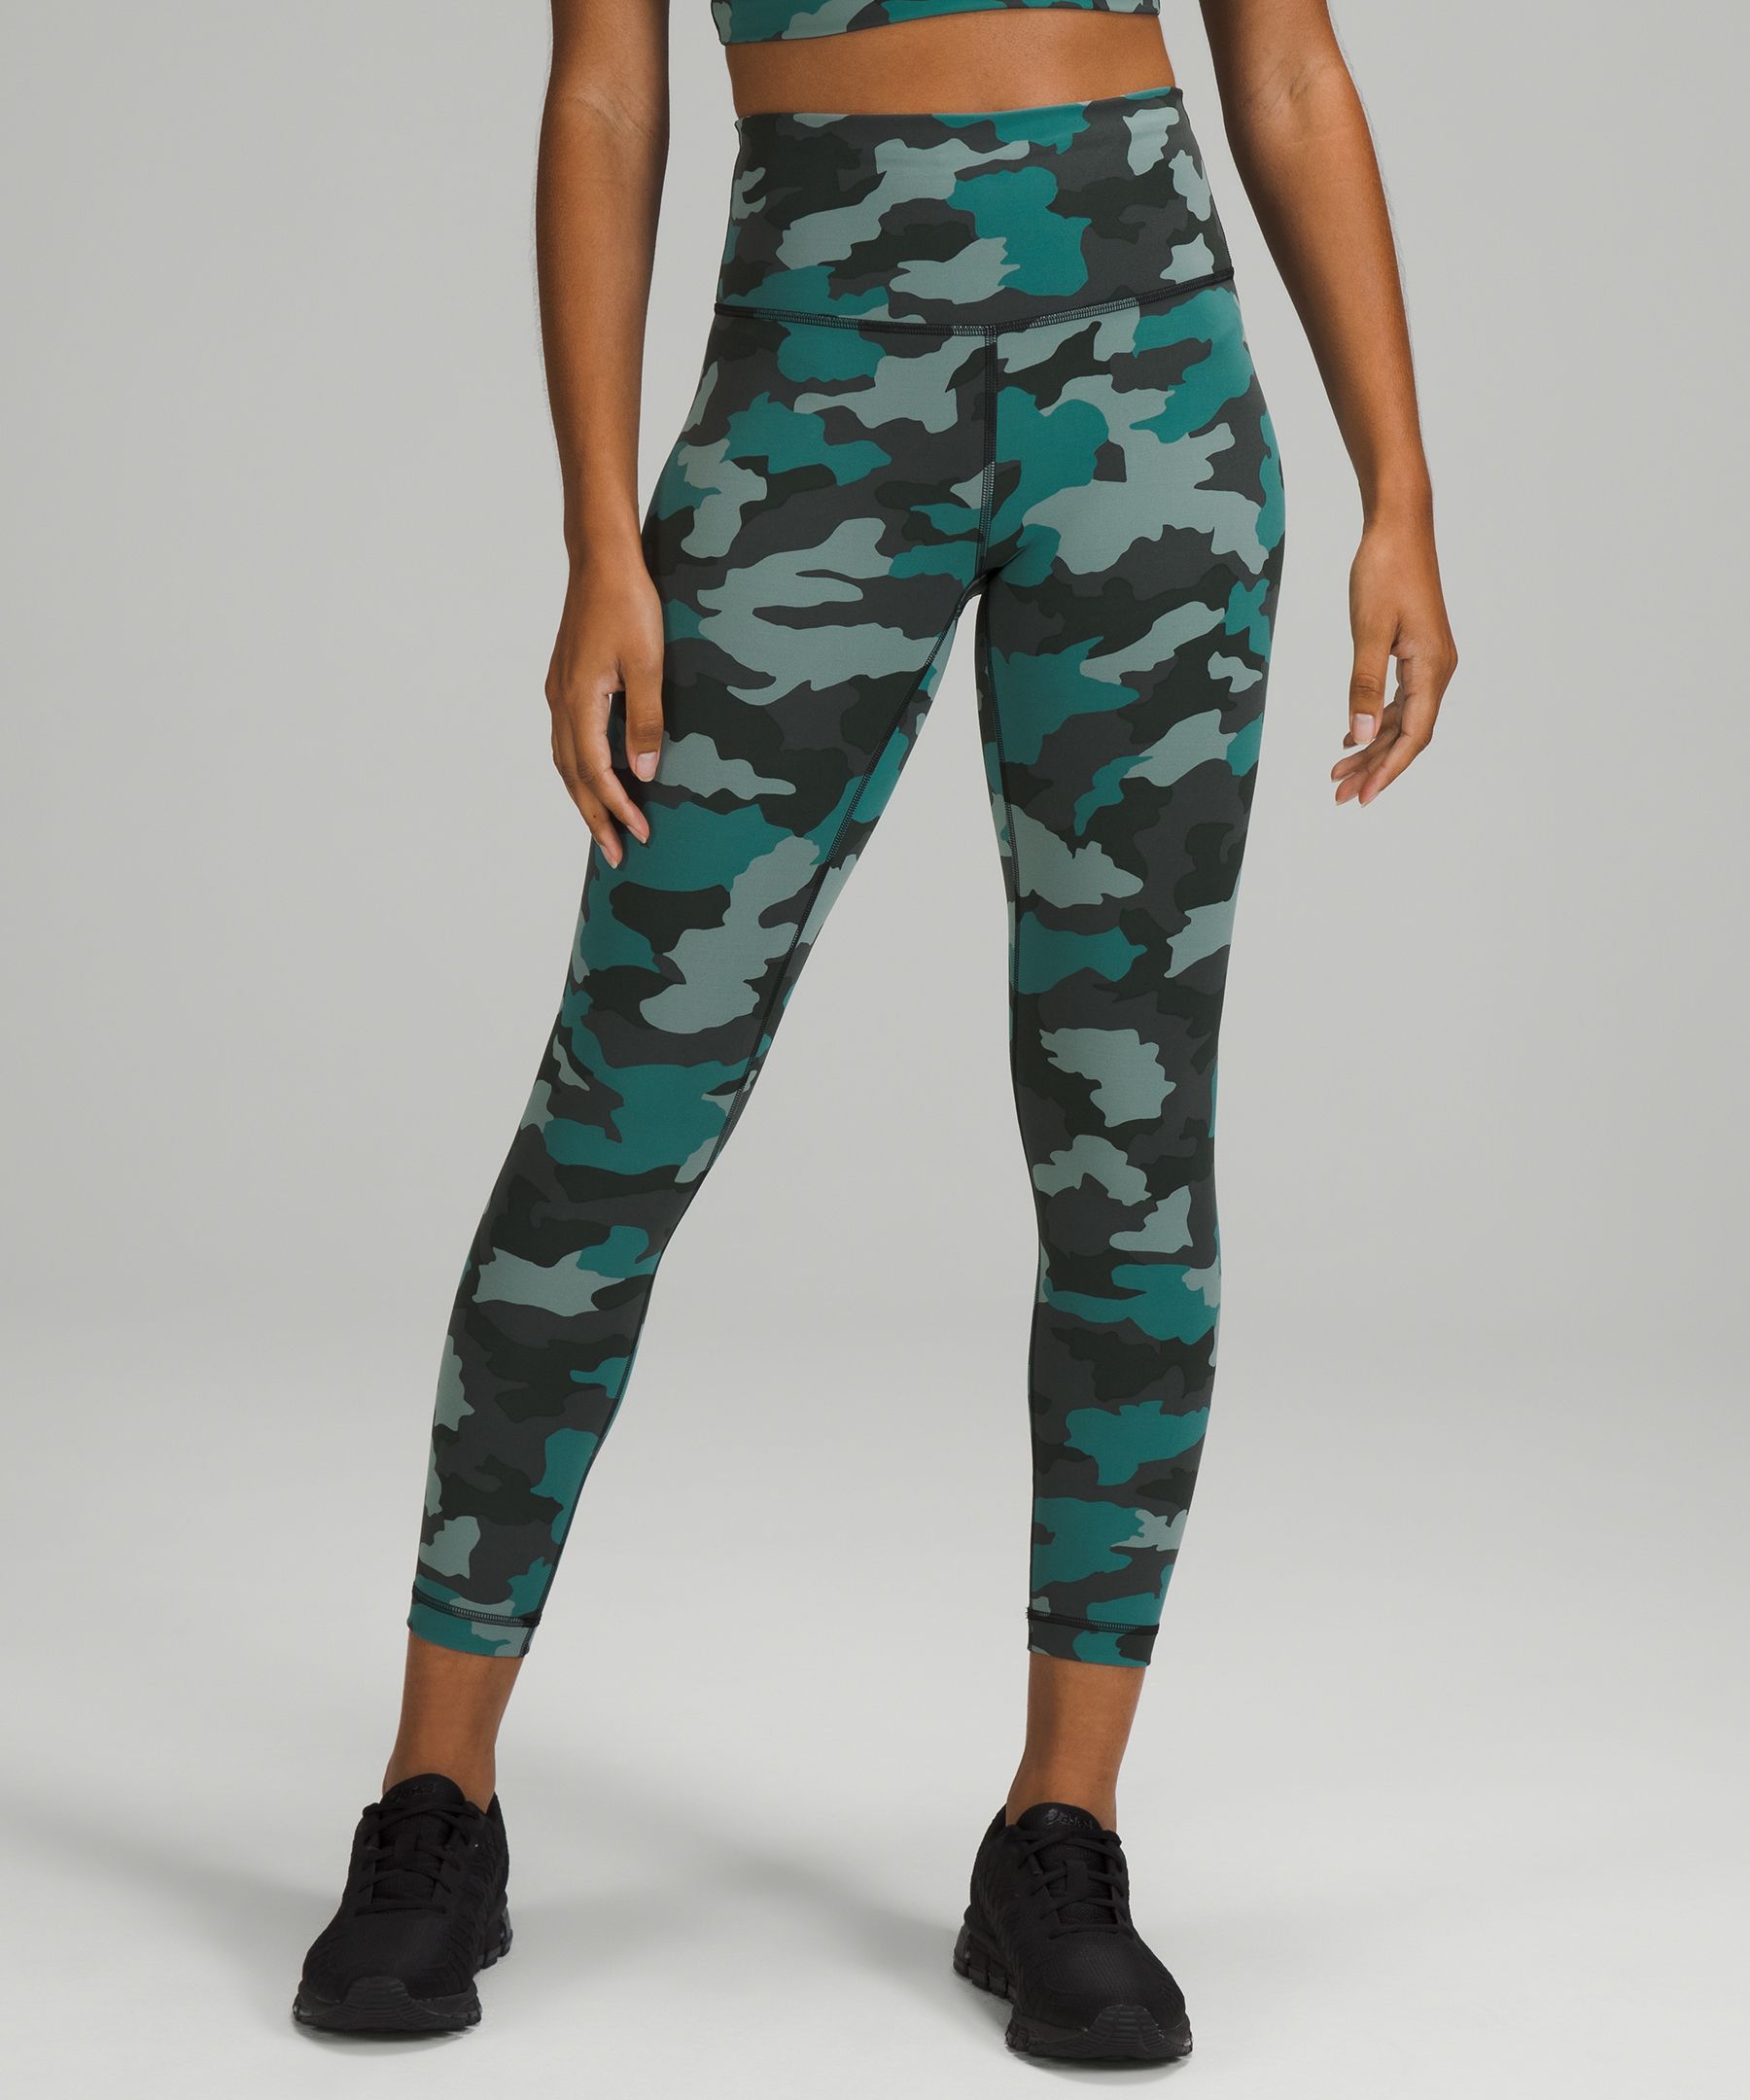 Lululemon Wunder Train High-rise Tights 25" In Heritage 365 Camo Tidewater Teal Multi